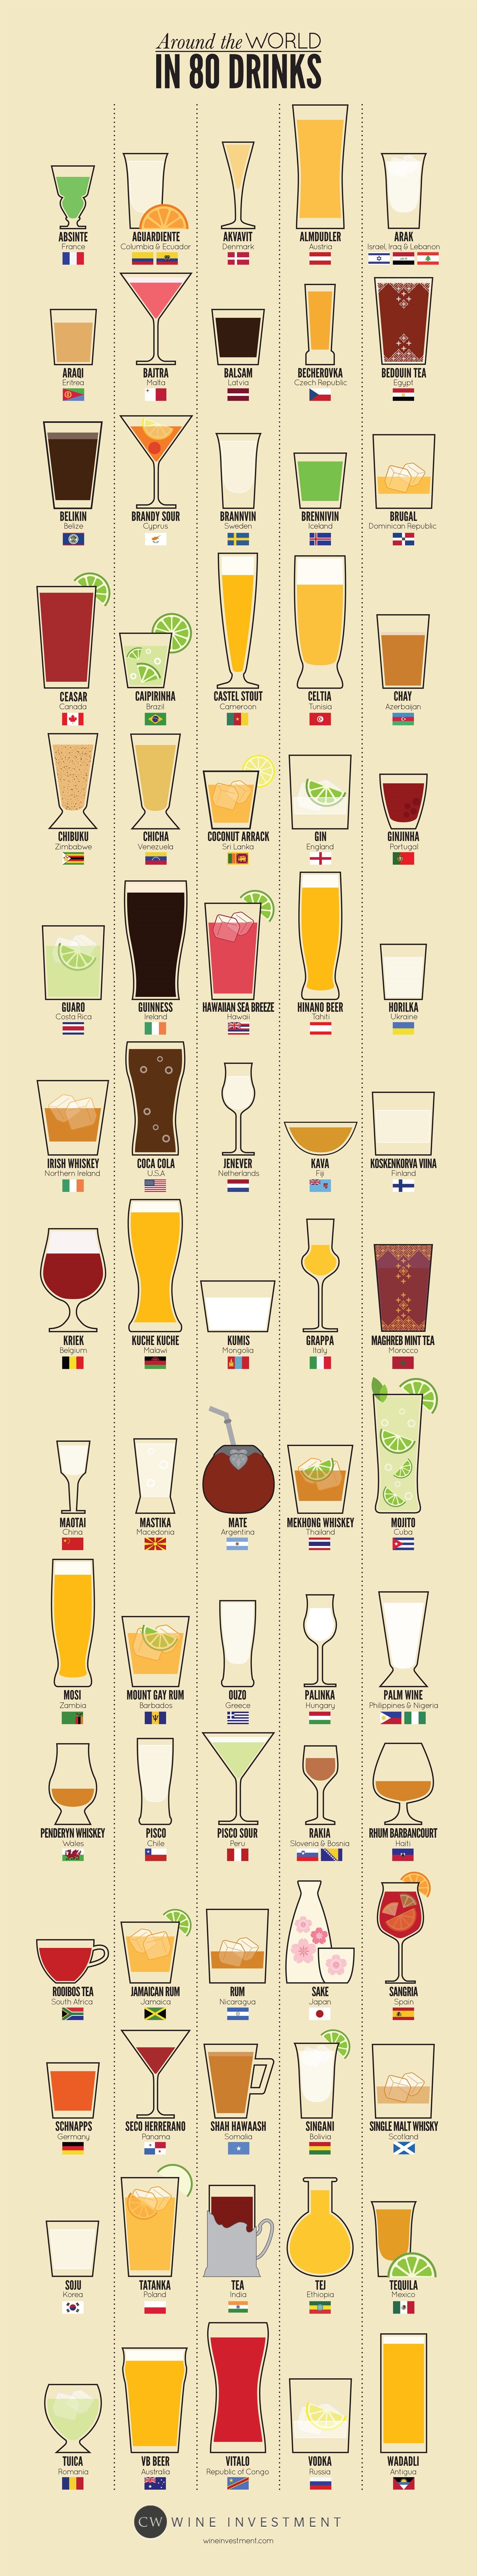 Around the World in 80 Drinks by WineInvestment.com